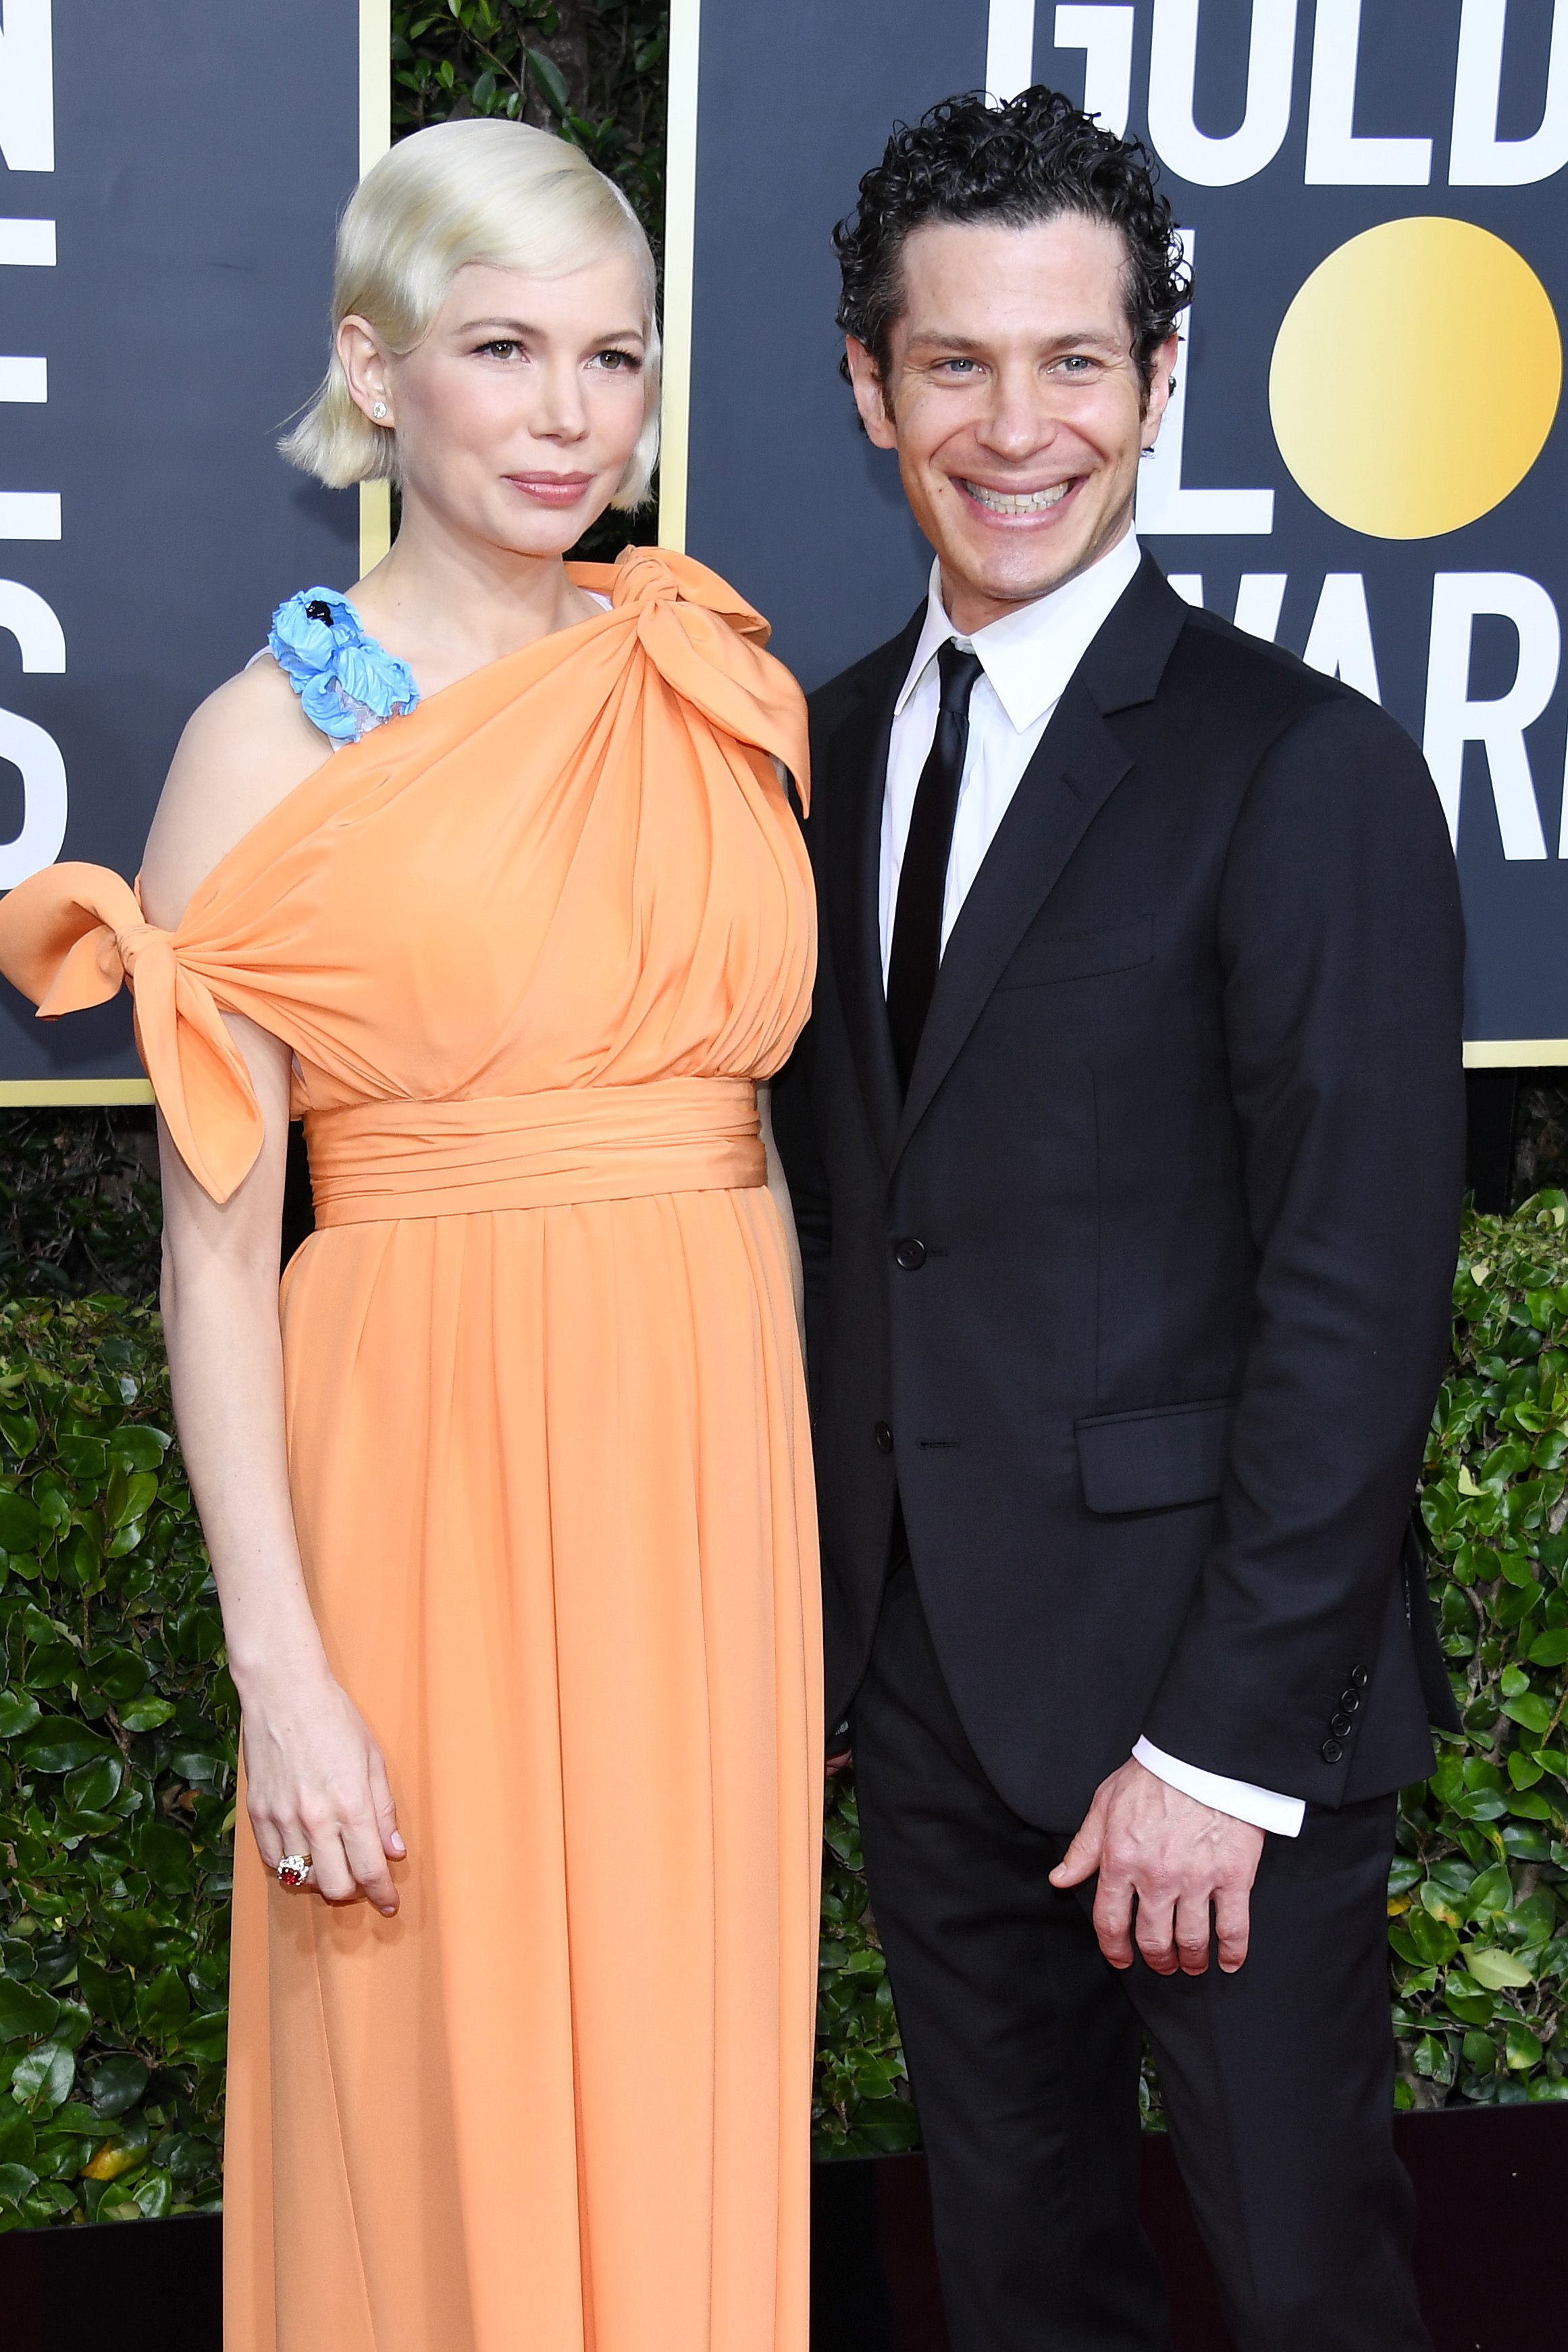 Michelle Williams and Thomas Kail, seen at the 77th Annual Golden Globe Awards in 2020, secretly married in March 2020